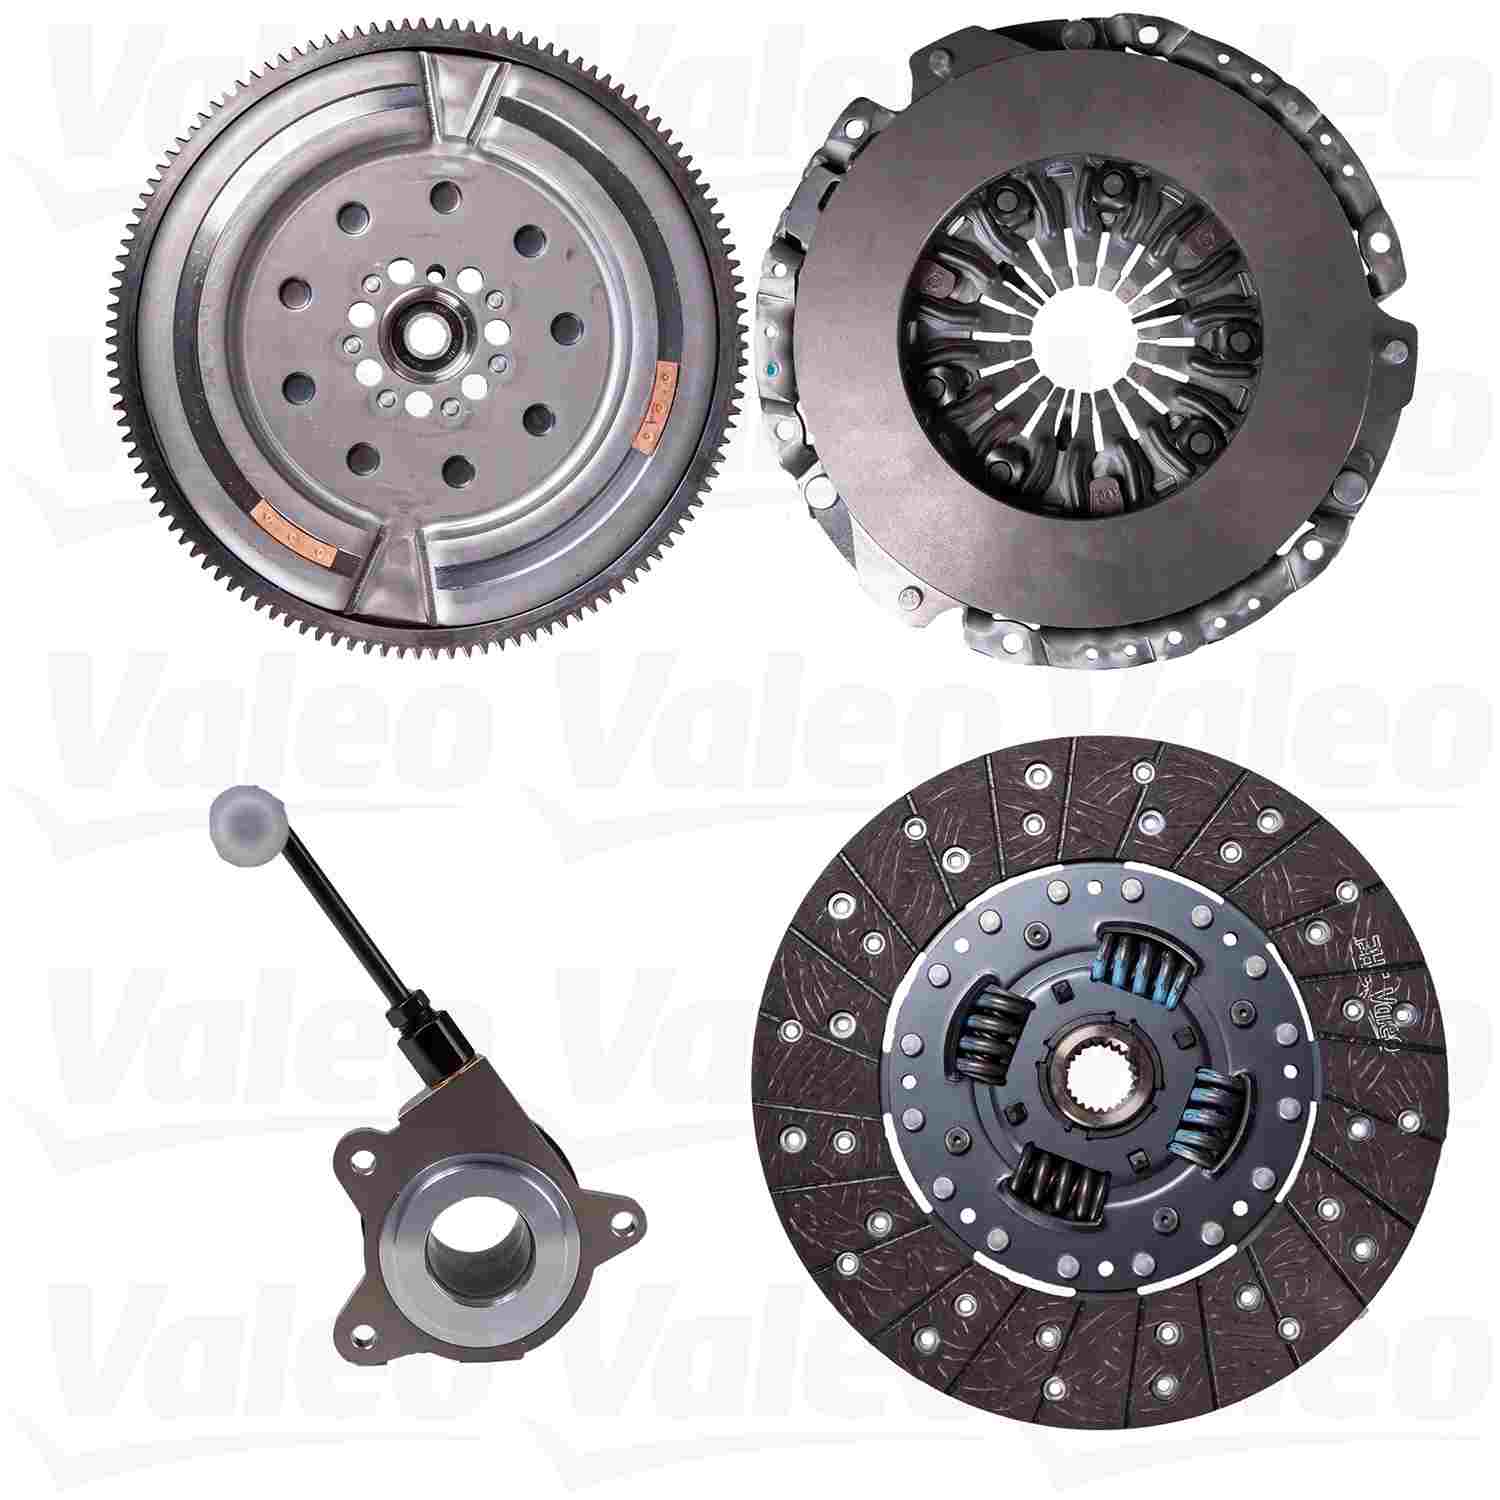 Back View of Transmission Clutch and Flywheel Kit VALEO 874201